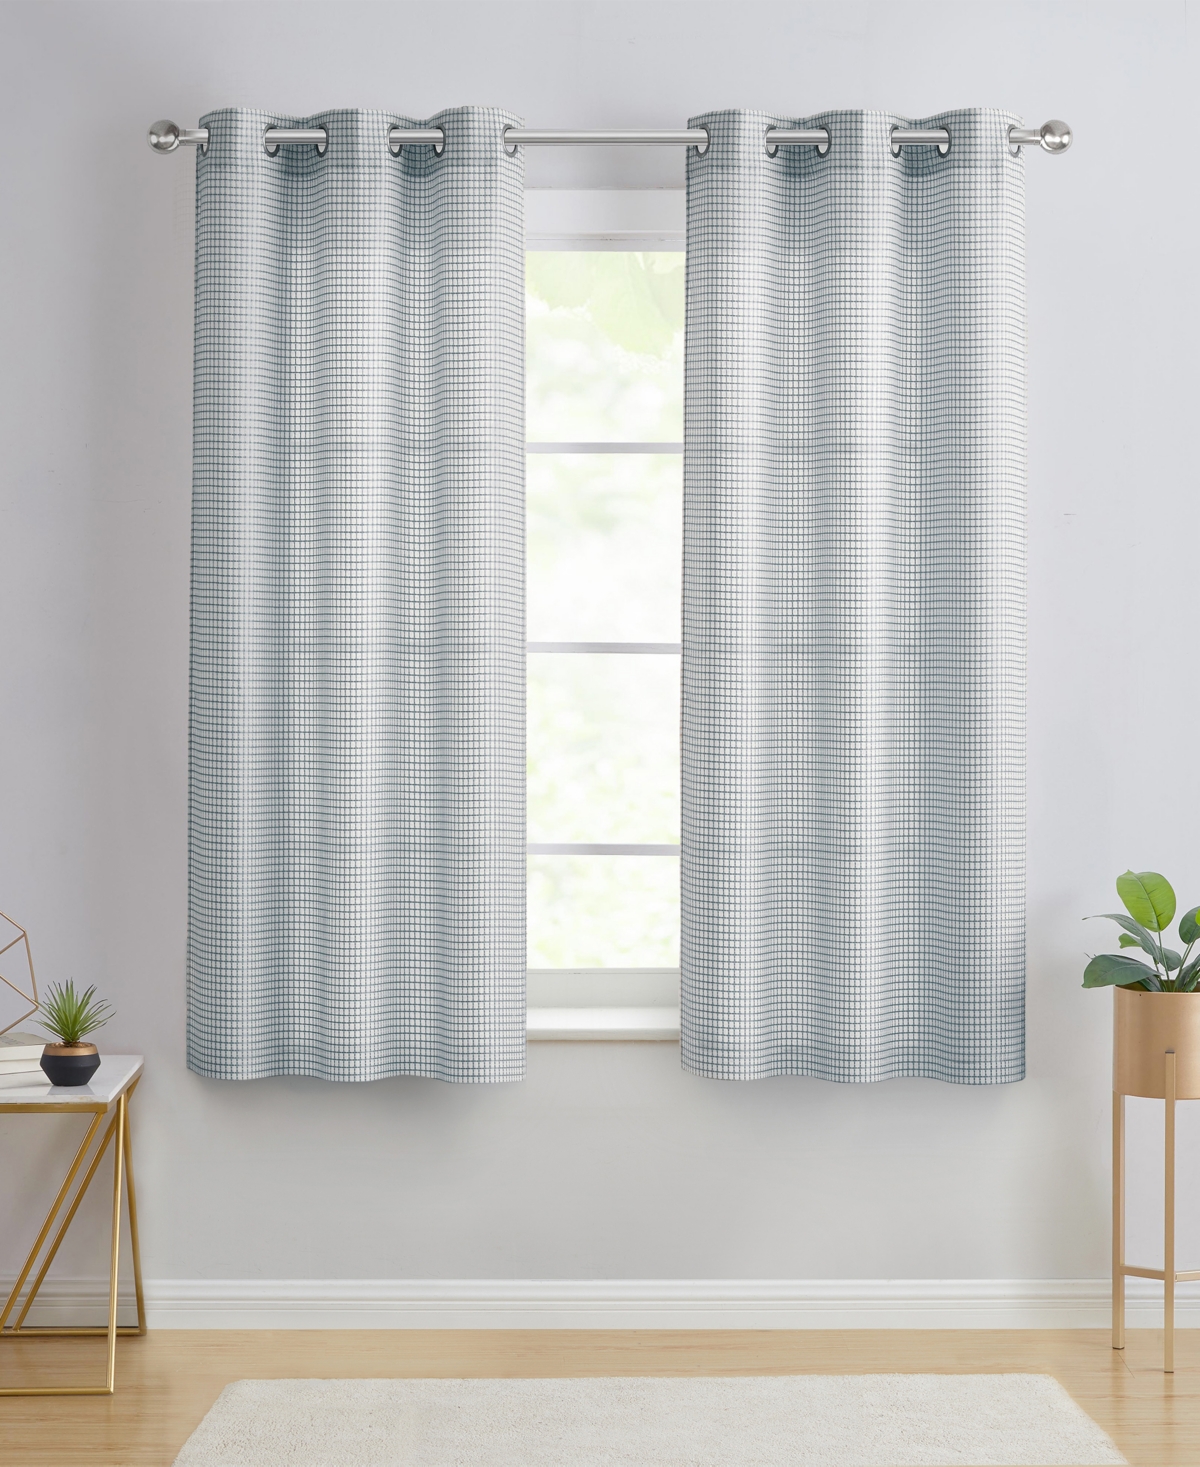 Vcny Home Hannah Grid Waffle Light Filtering 2-piece Curtain Panel Set, 76" X 63" In Teal